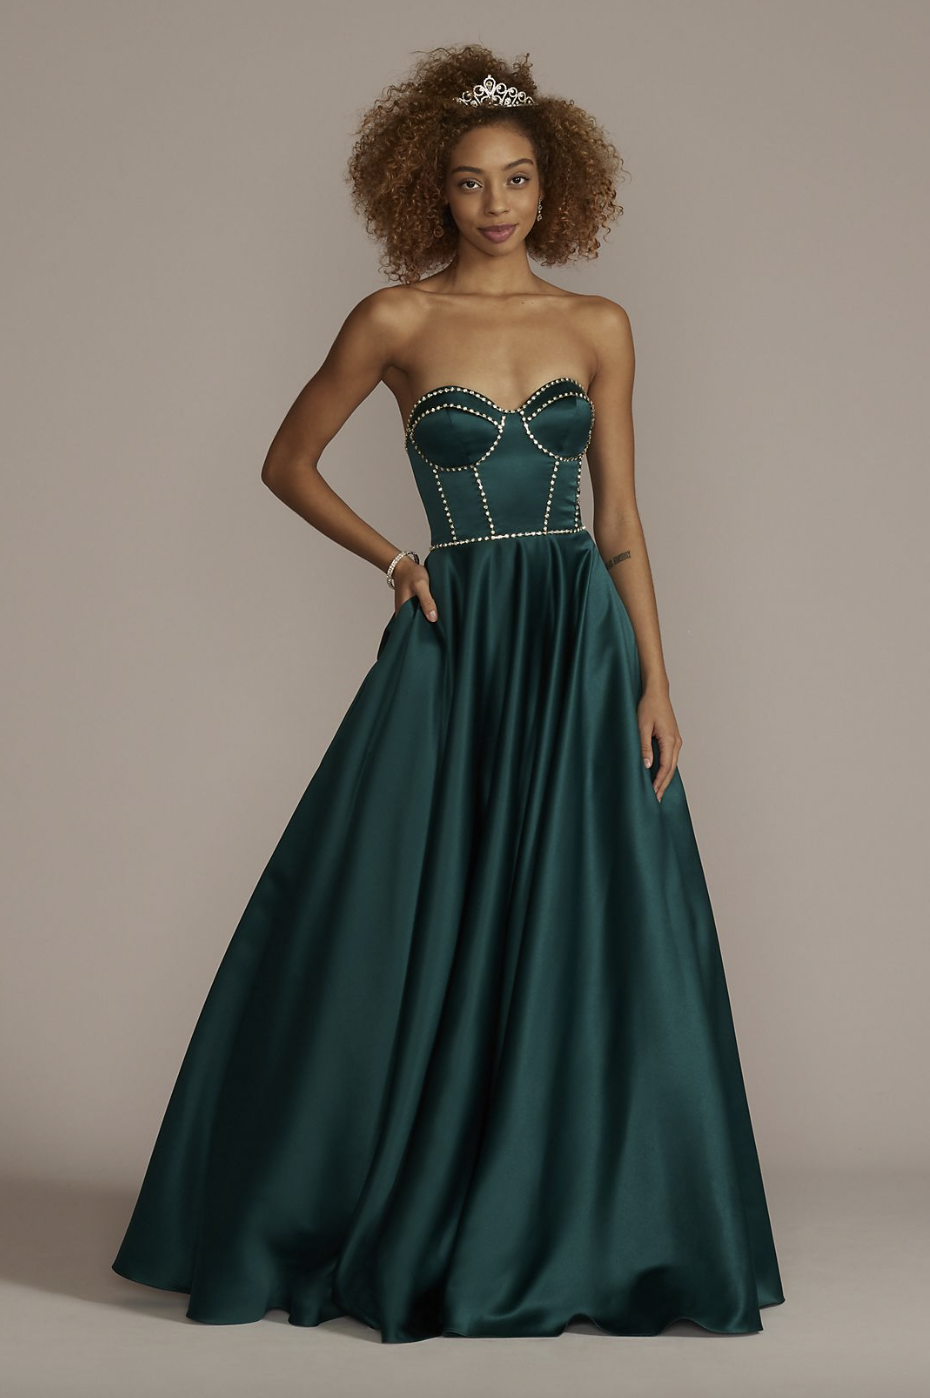 Satin Ball Gown With Jewel Embellished Bodice